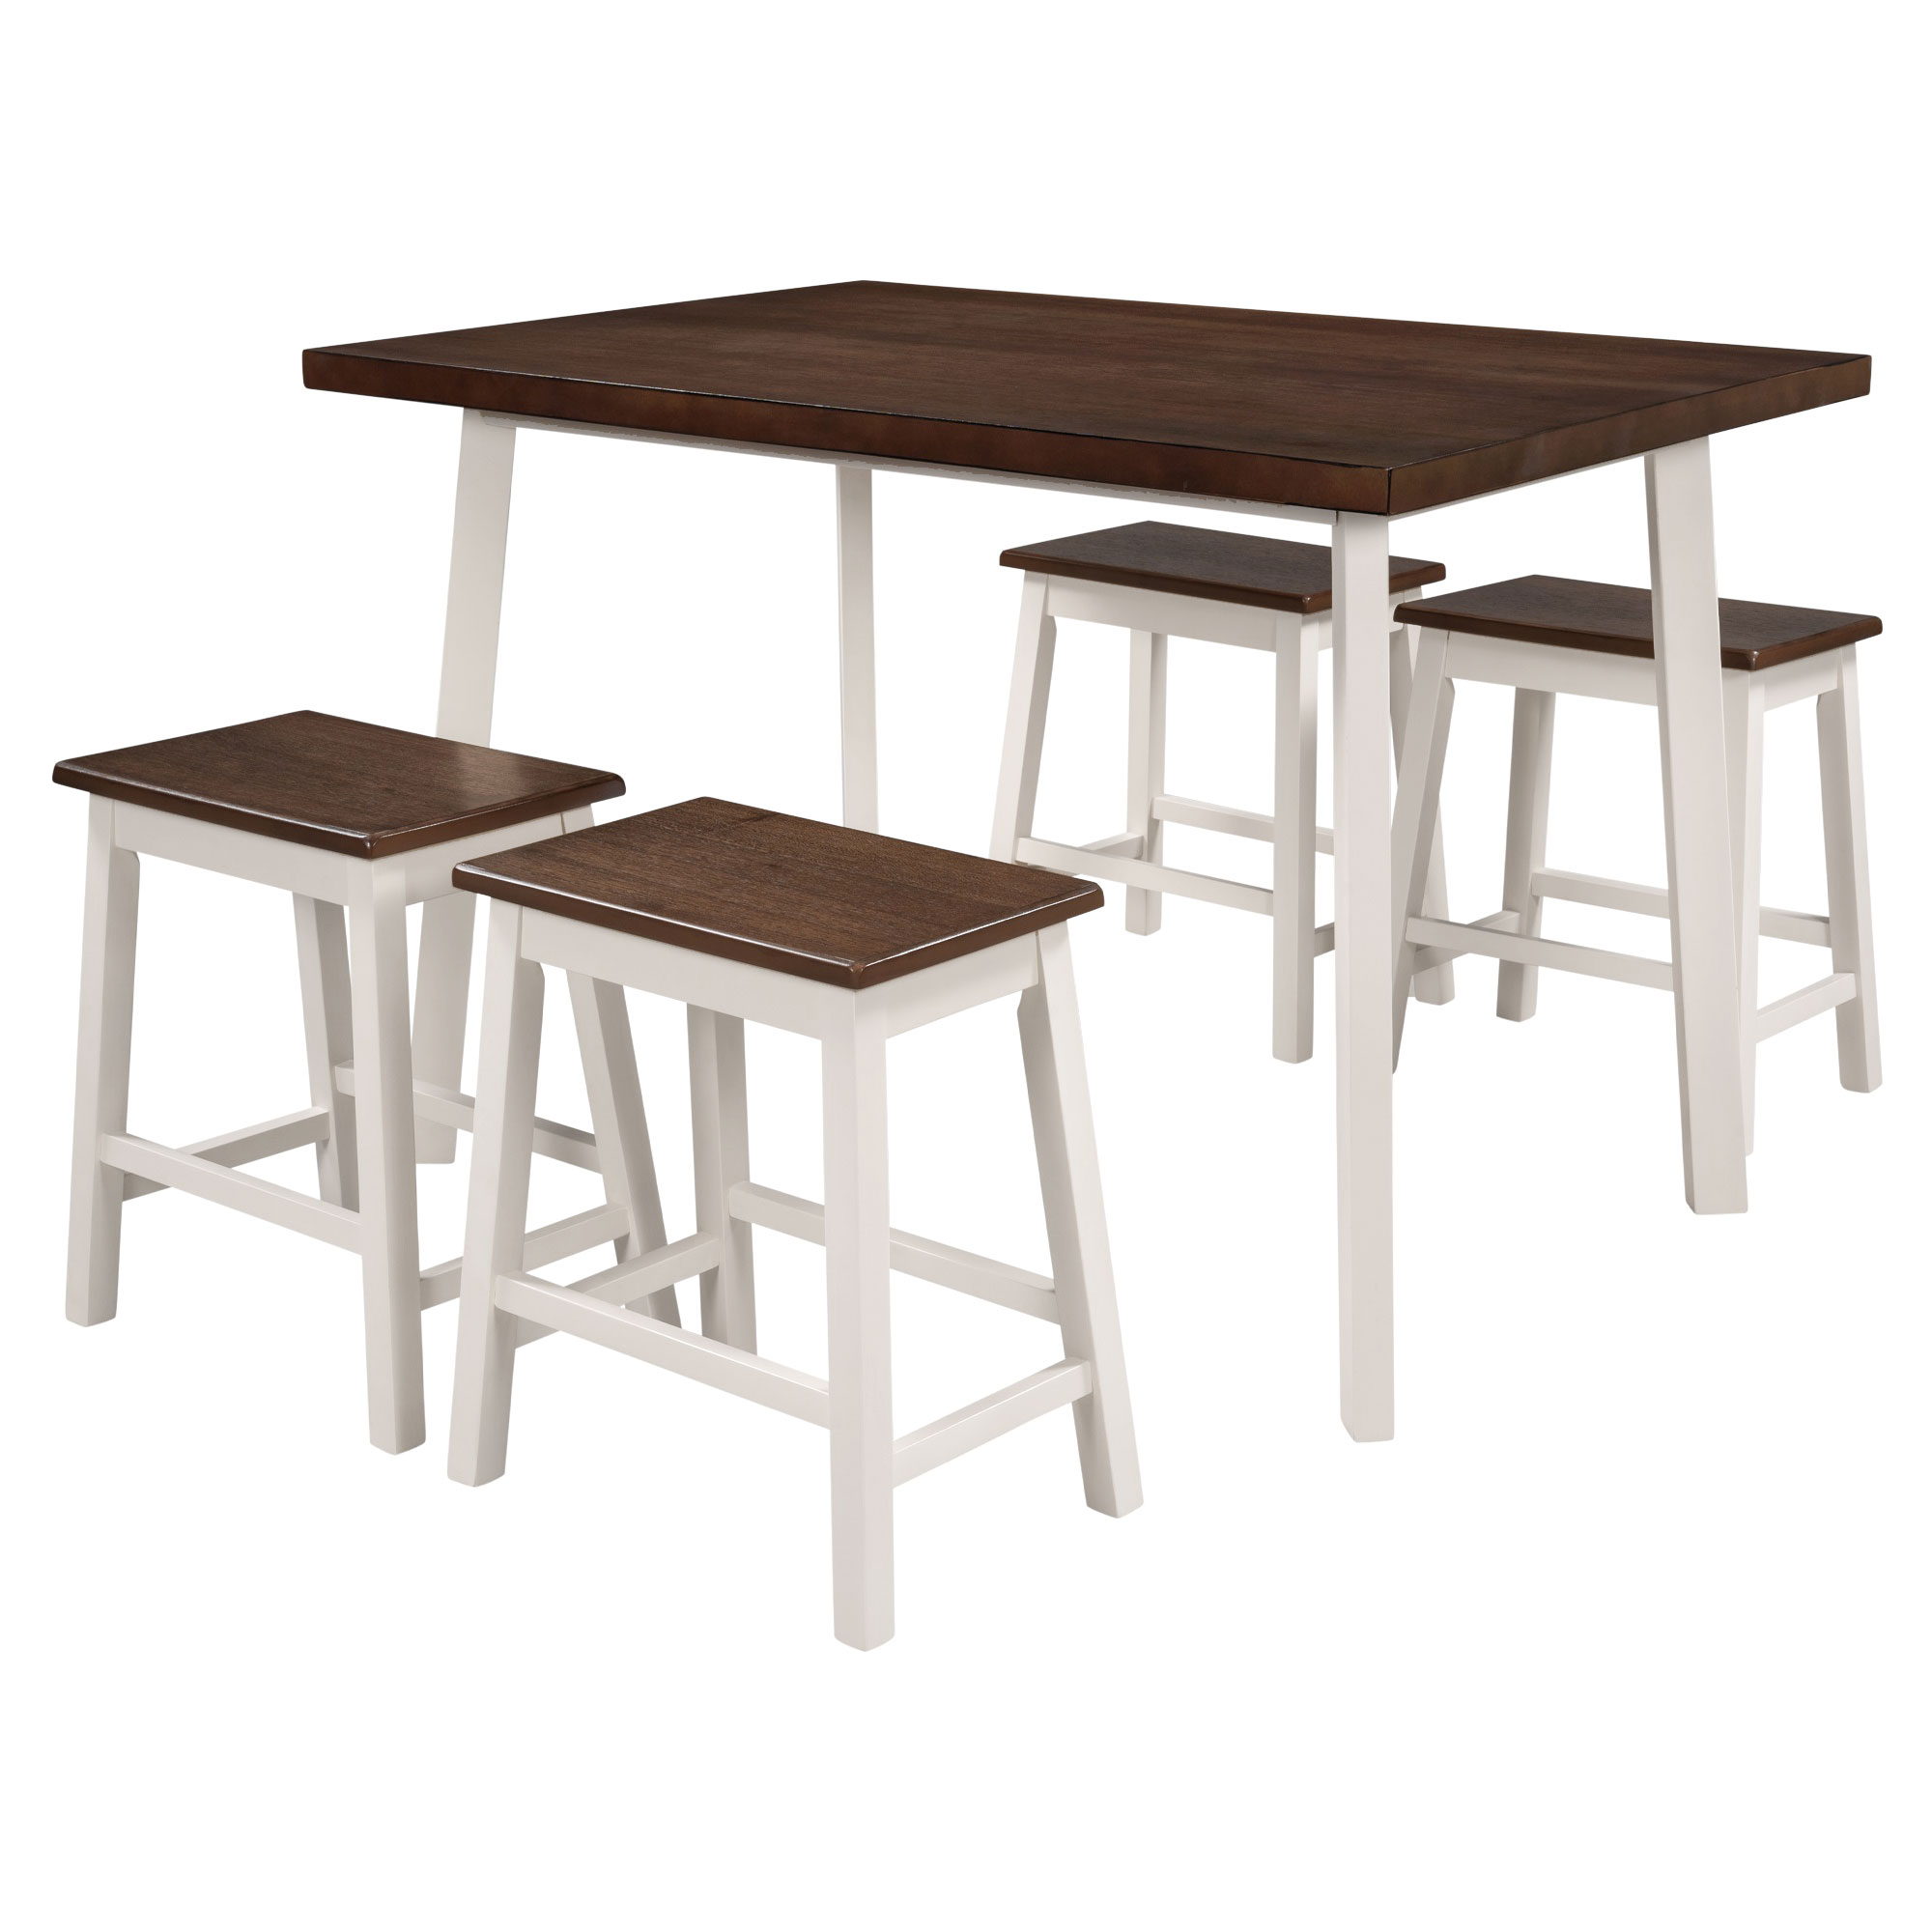 5-Piece Rustic Wood Kitchen Dining Table Set with 4 Stools for Small Places, Cherry+White-Boyel Living